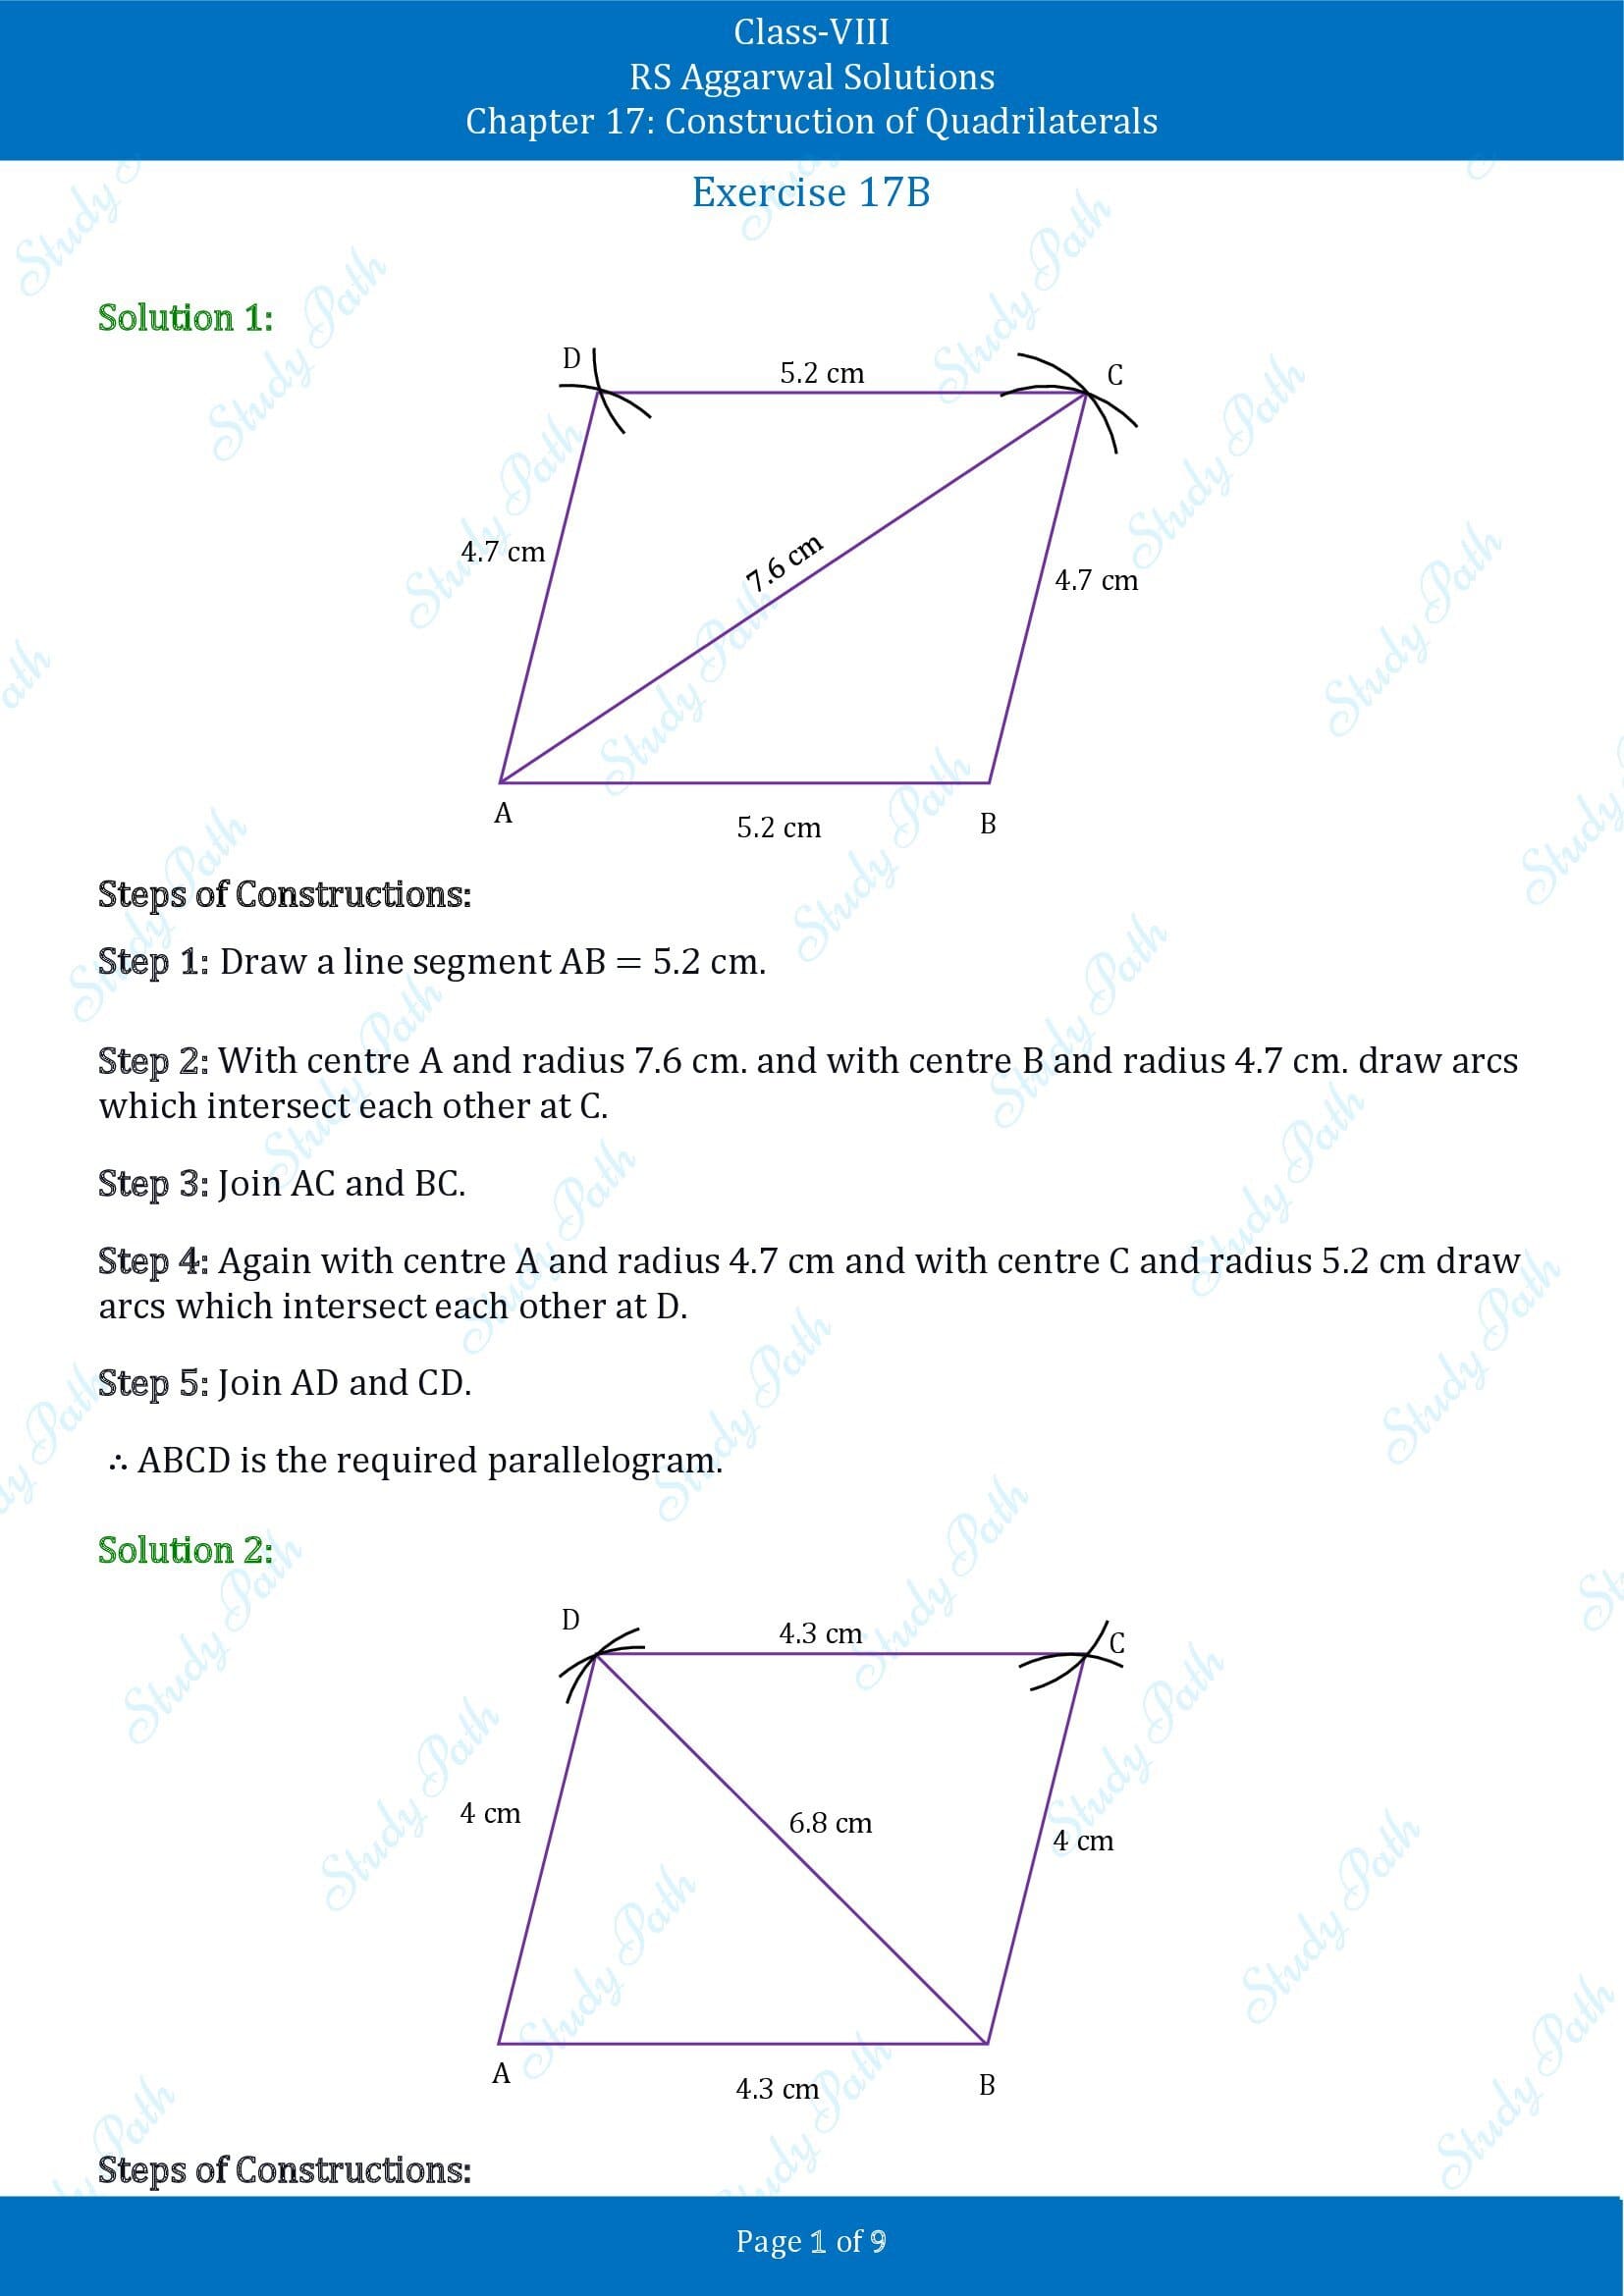 RS Aggarwal Solutions Class 8 Chapter 17 Construction of Quadrilaterals Exercise 17B 00001